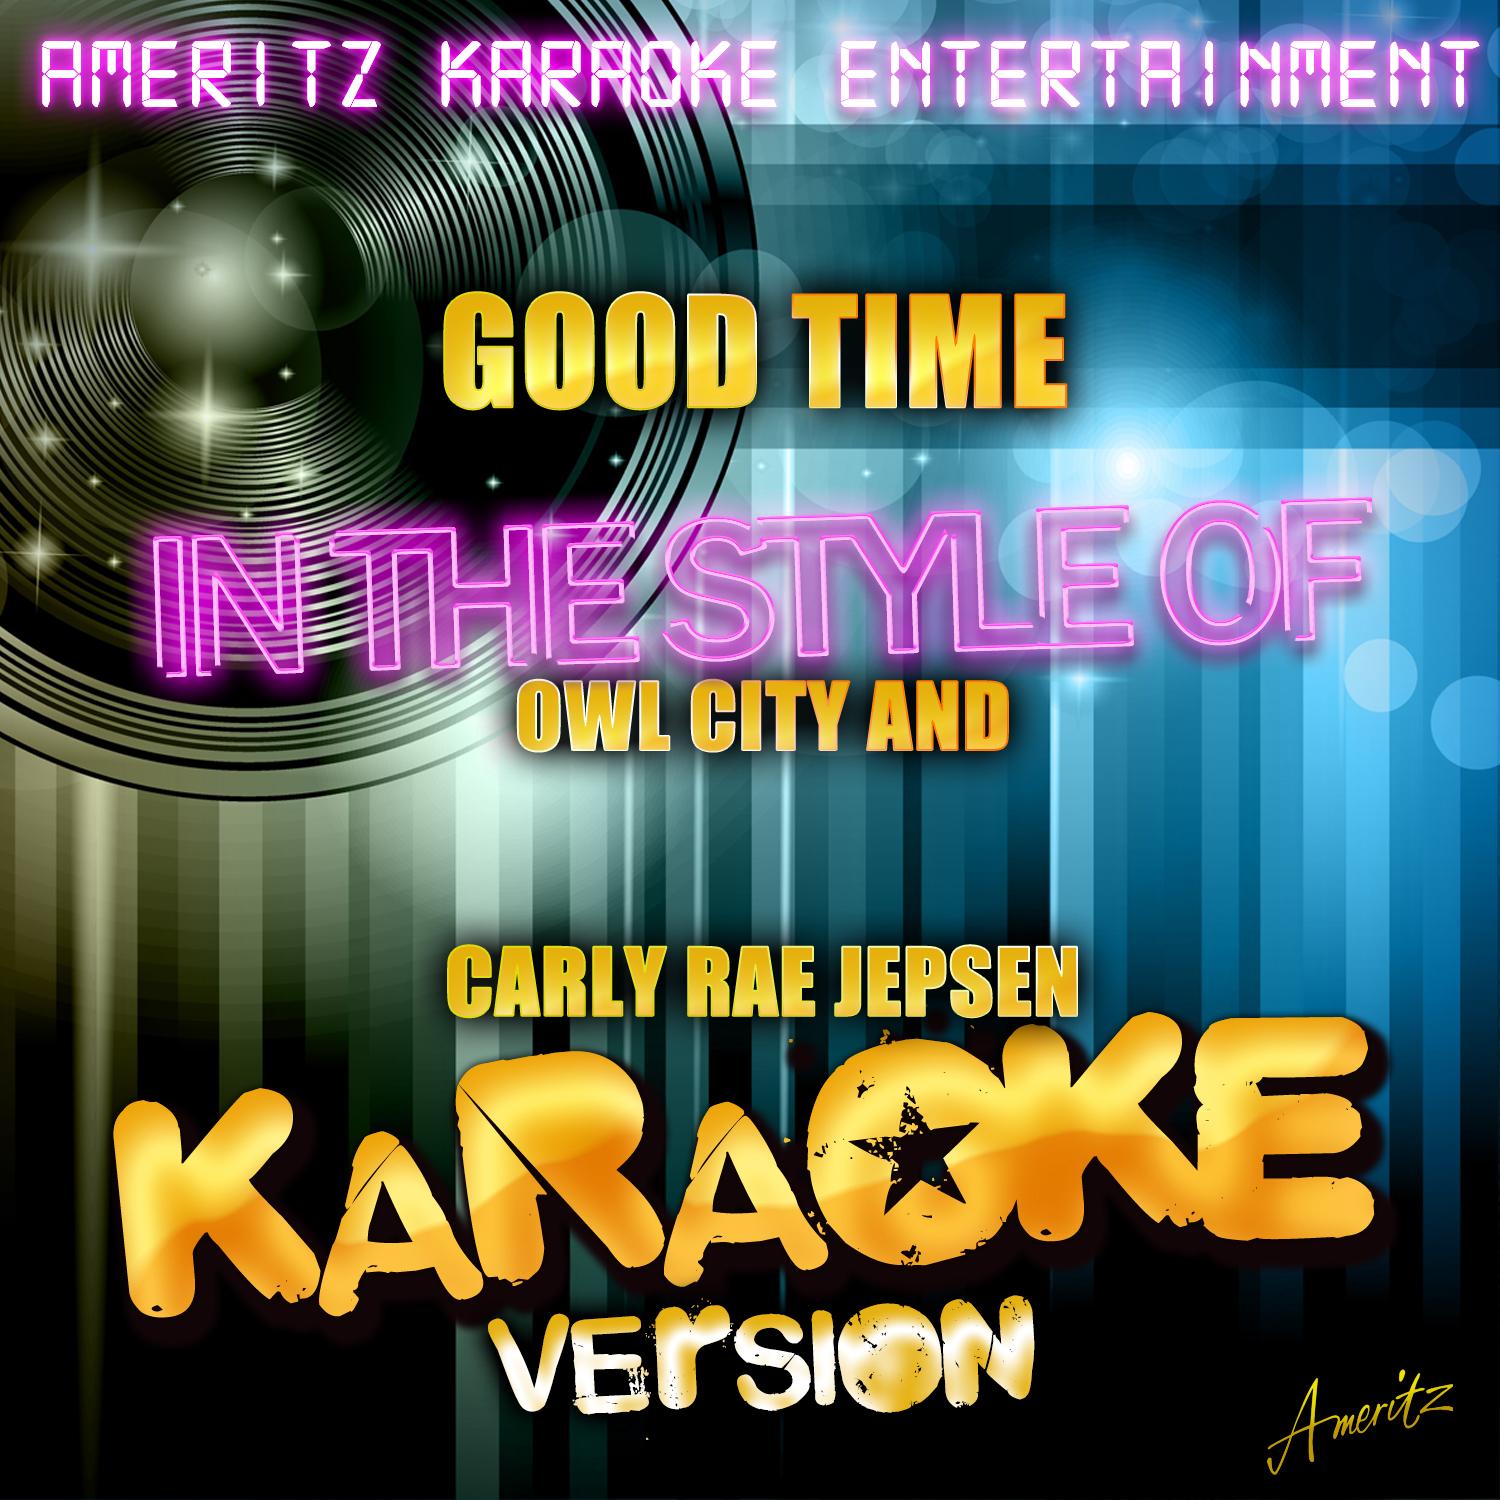 Good Time (In the Style of Owl City and Carly Rae Jepsen) [Karaoke Version] - Single